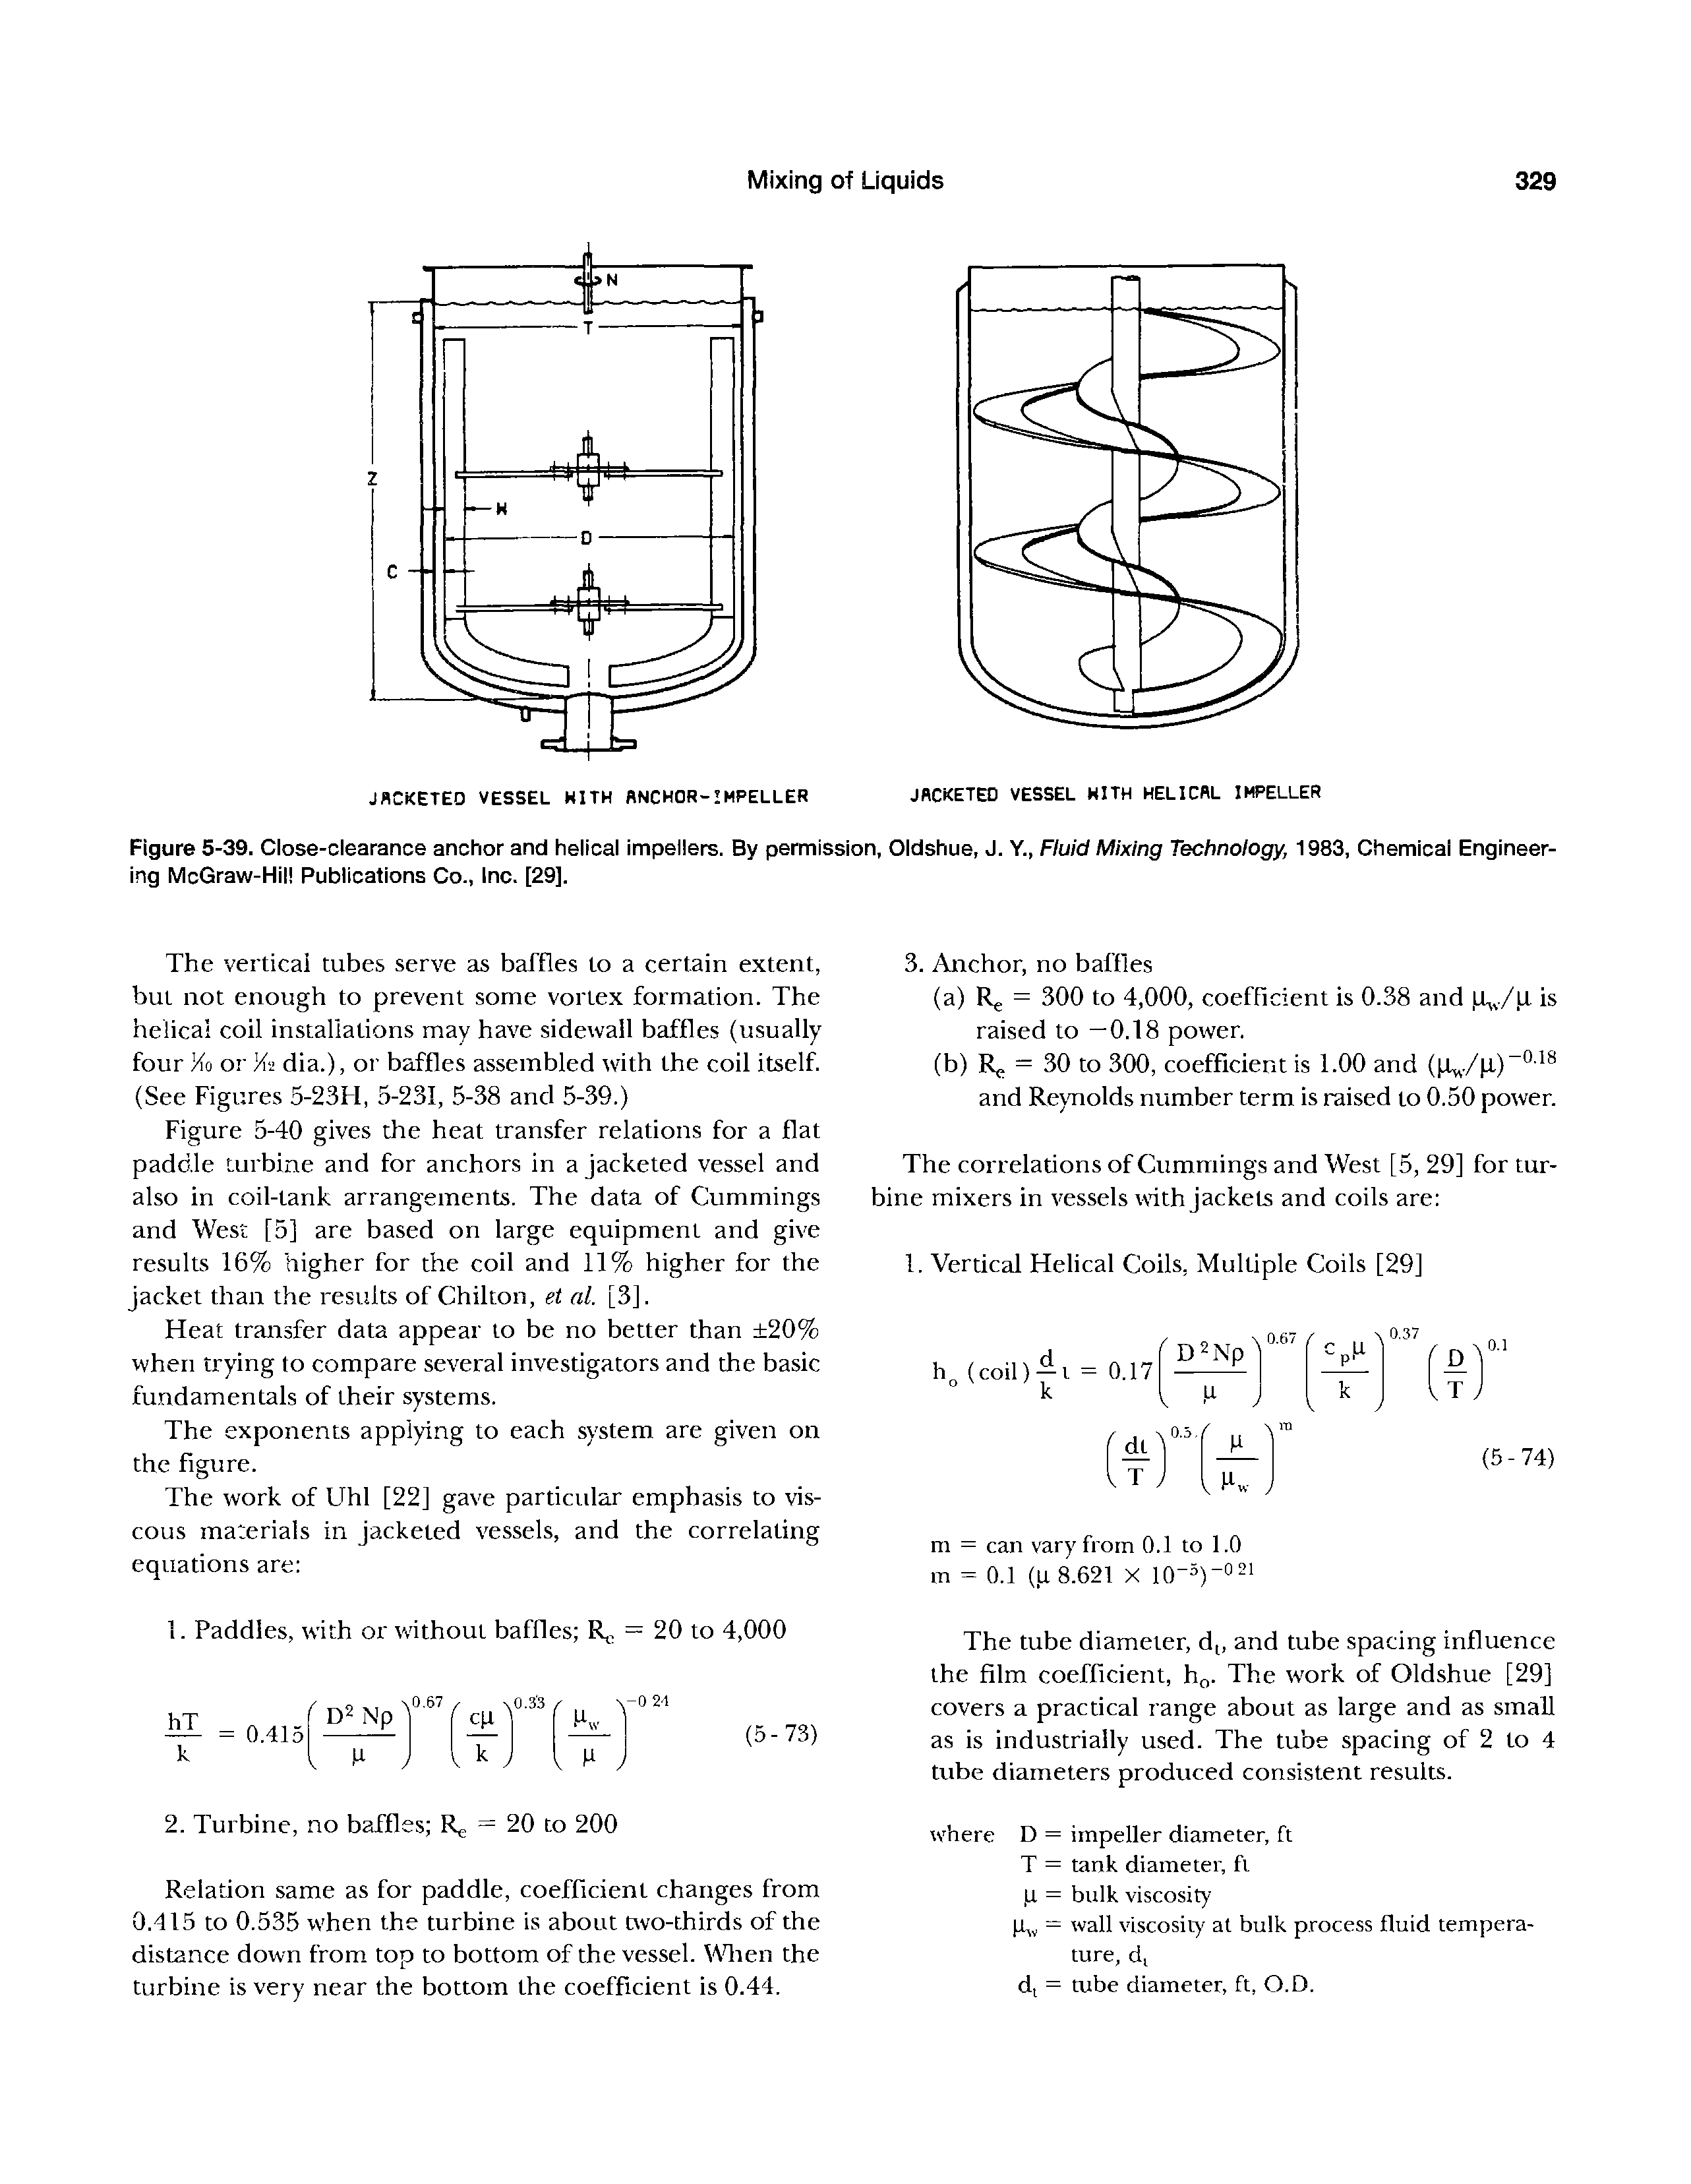 Figure 5-39. Close-clearance anchor and helical impellers. By permission, Oldshue, J. Y., Fluid Mixing Technology, 1983, Chemical Engineering McGraw-Hill Publications Co., Inc. [29].